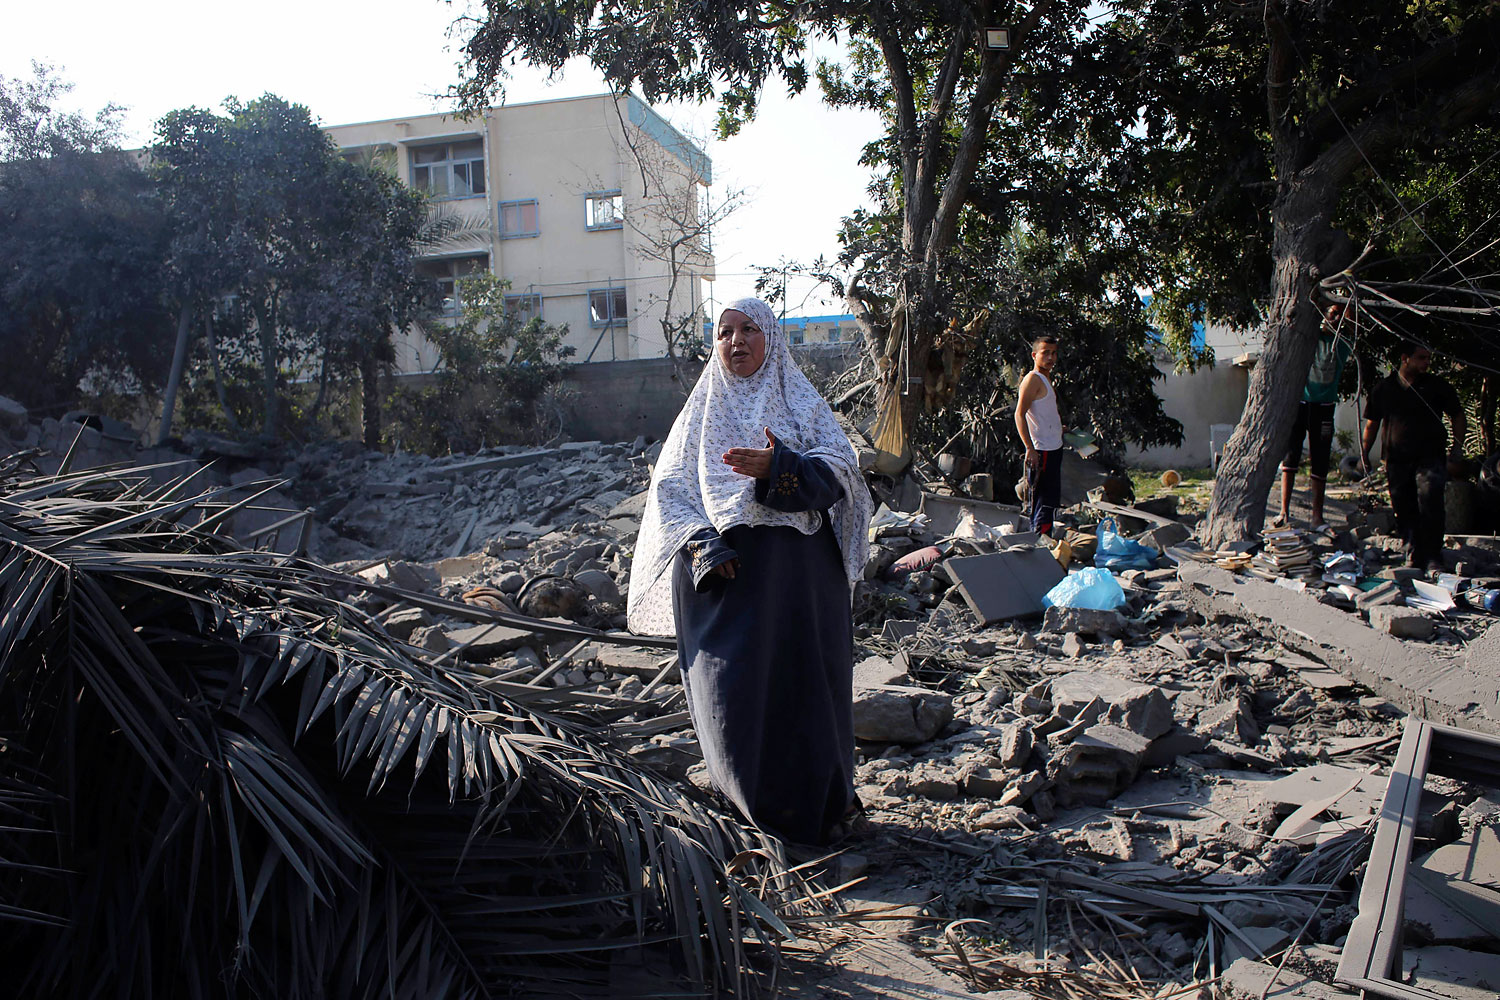 Palestinian woman gestures as she stands amidst the rubble of her house which police said was destroyed in an Israeli air strike in Rafah in the southern Gaza Strip